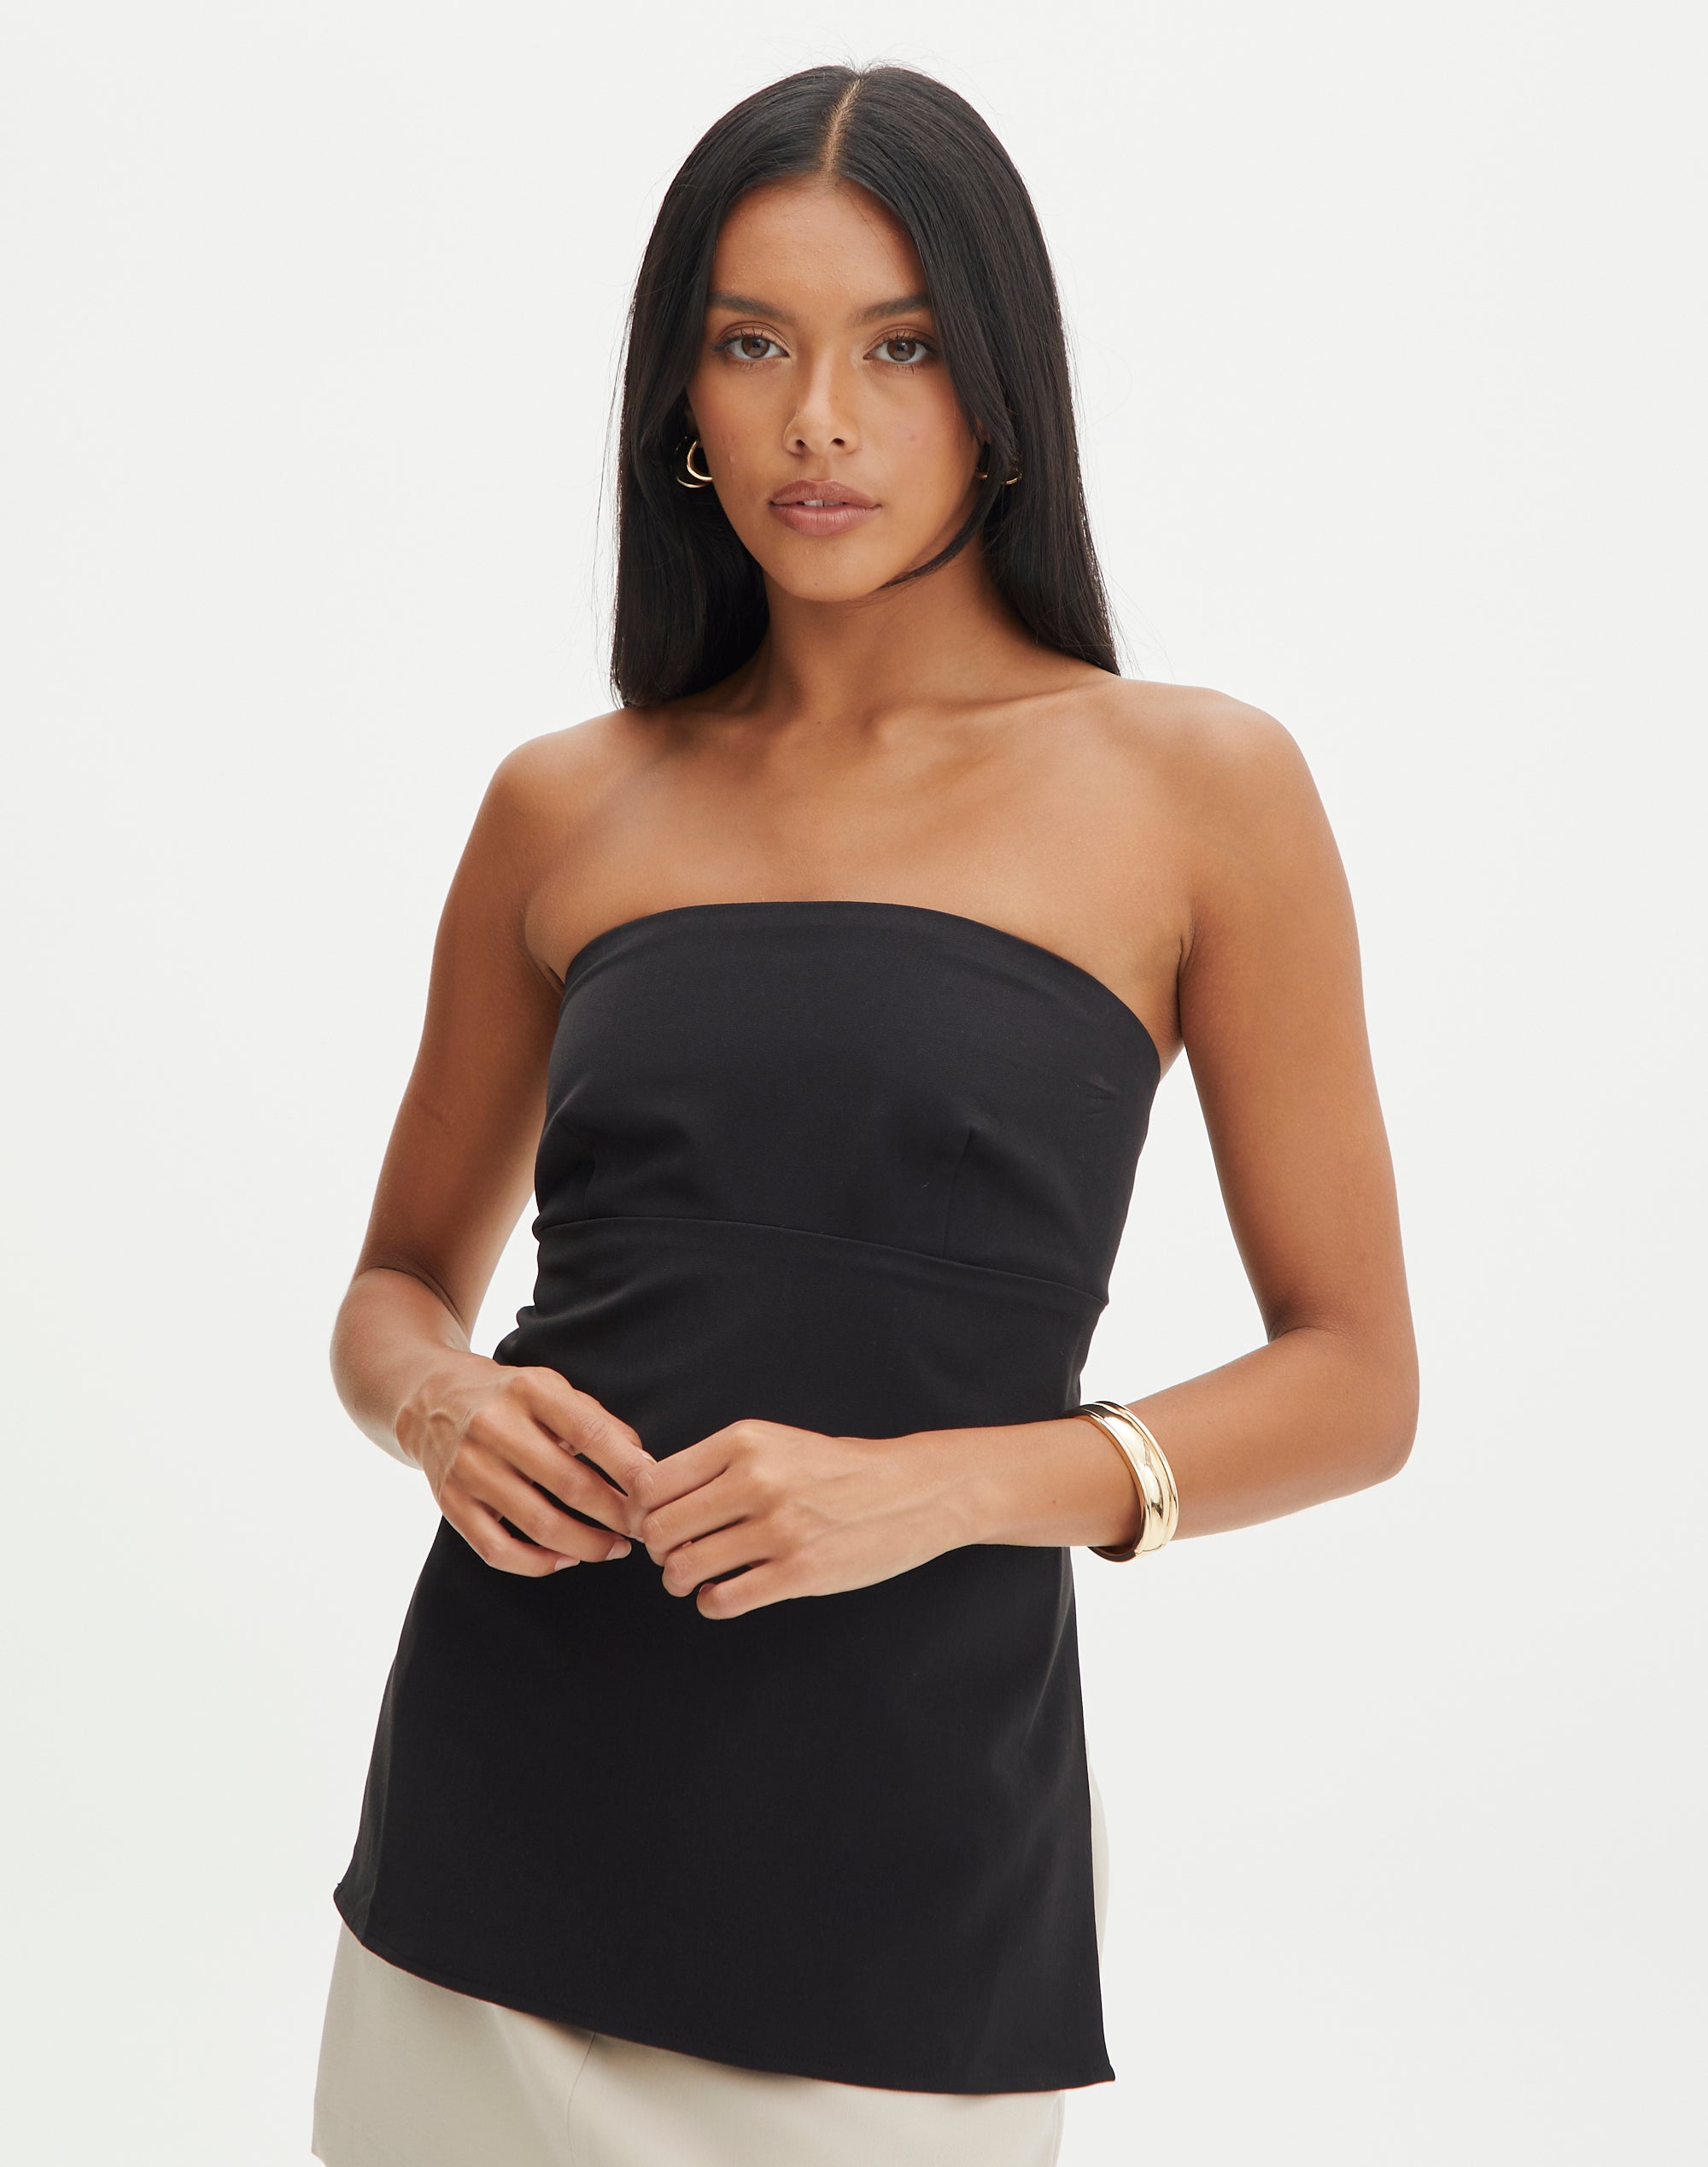 https://www.glassons.com/content/products/dami-strapless-cross-back-black-front-bv170514pln.jpg